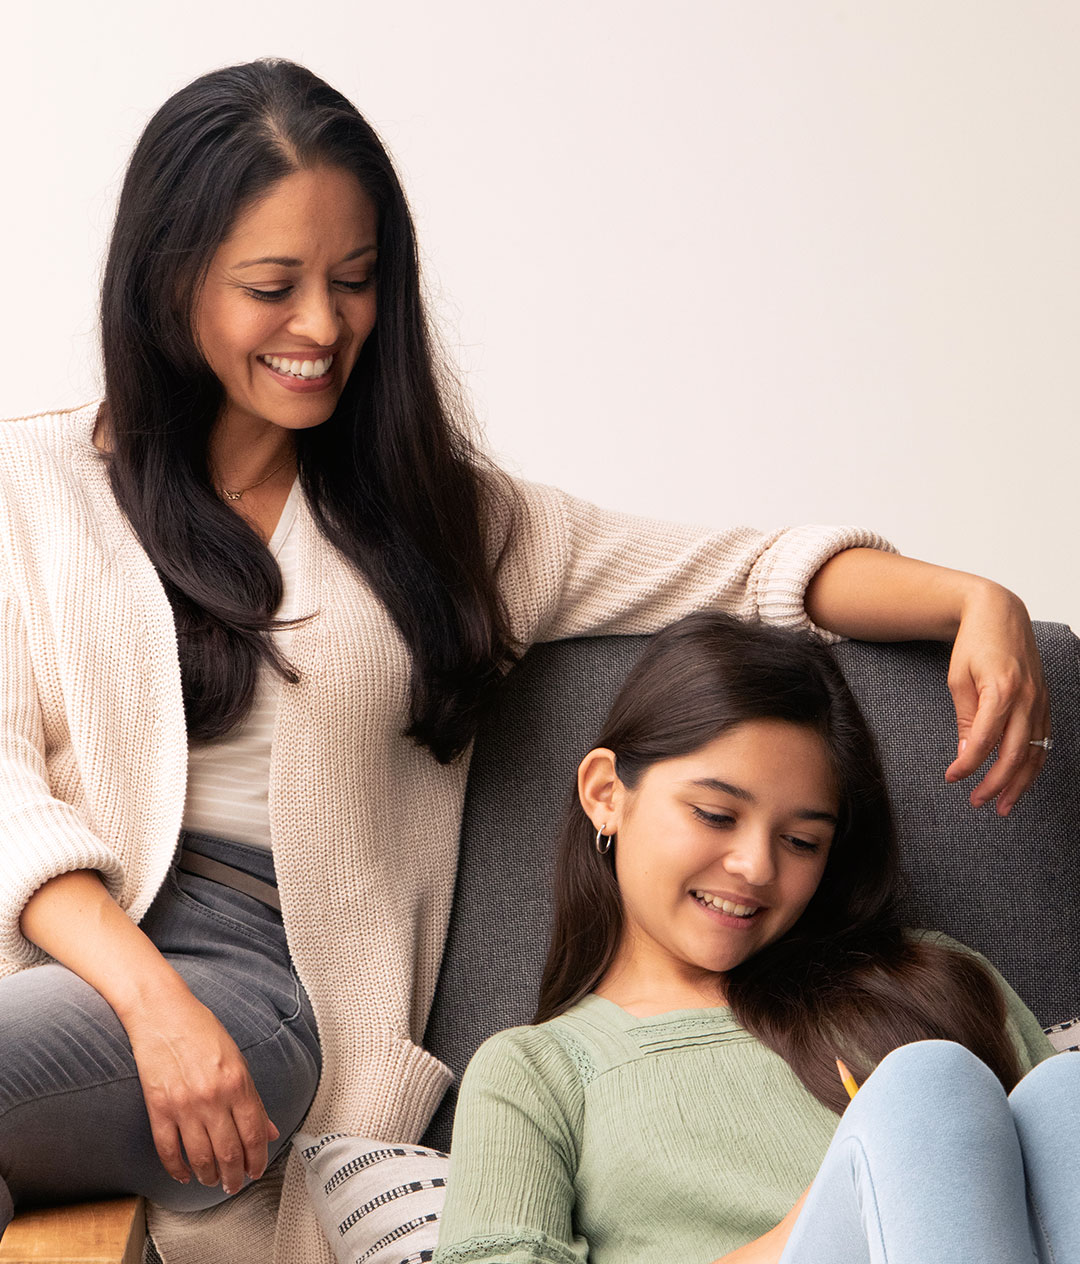 Image of mother and daughter at home sitting on couch